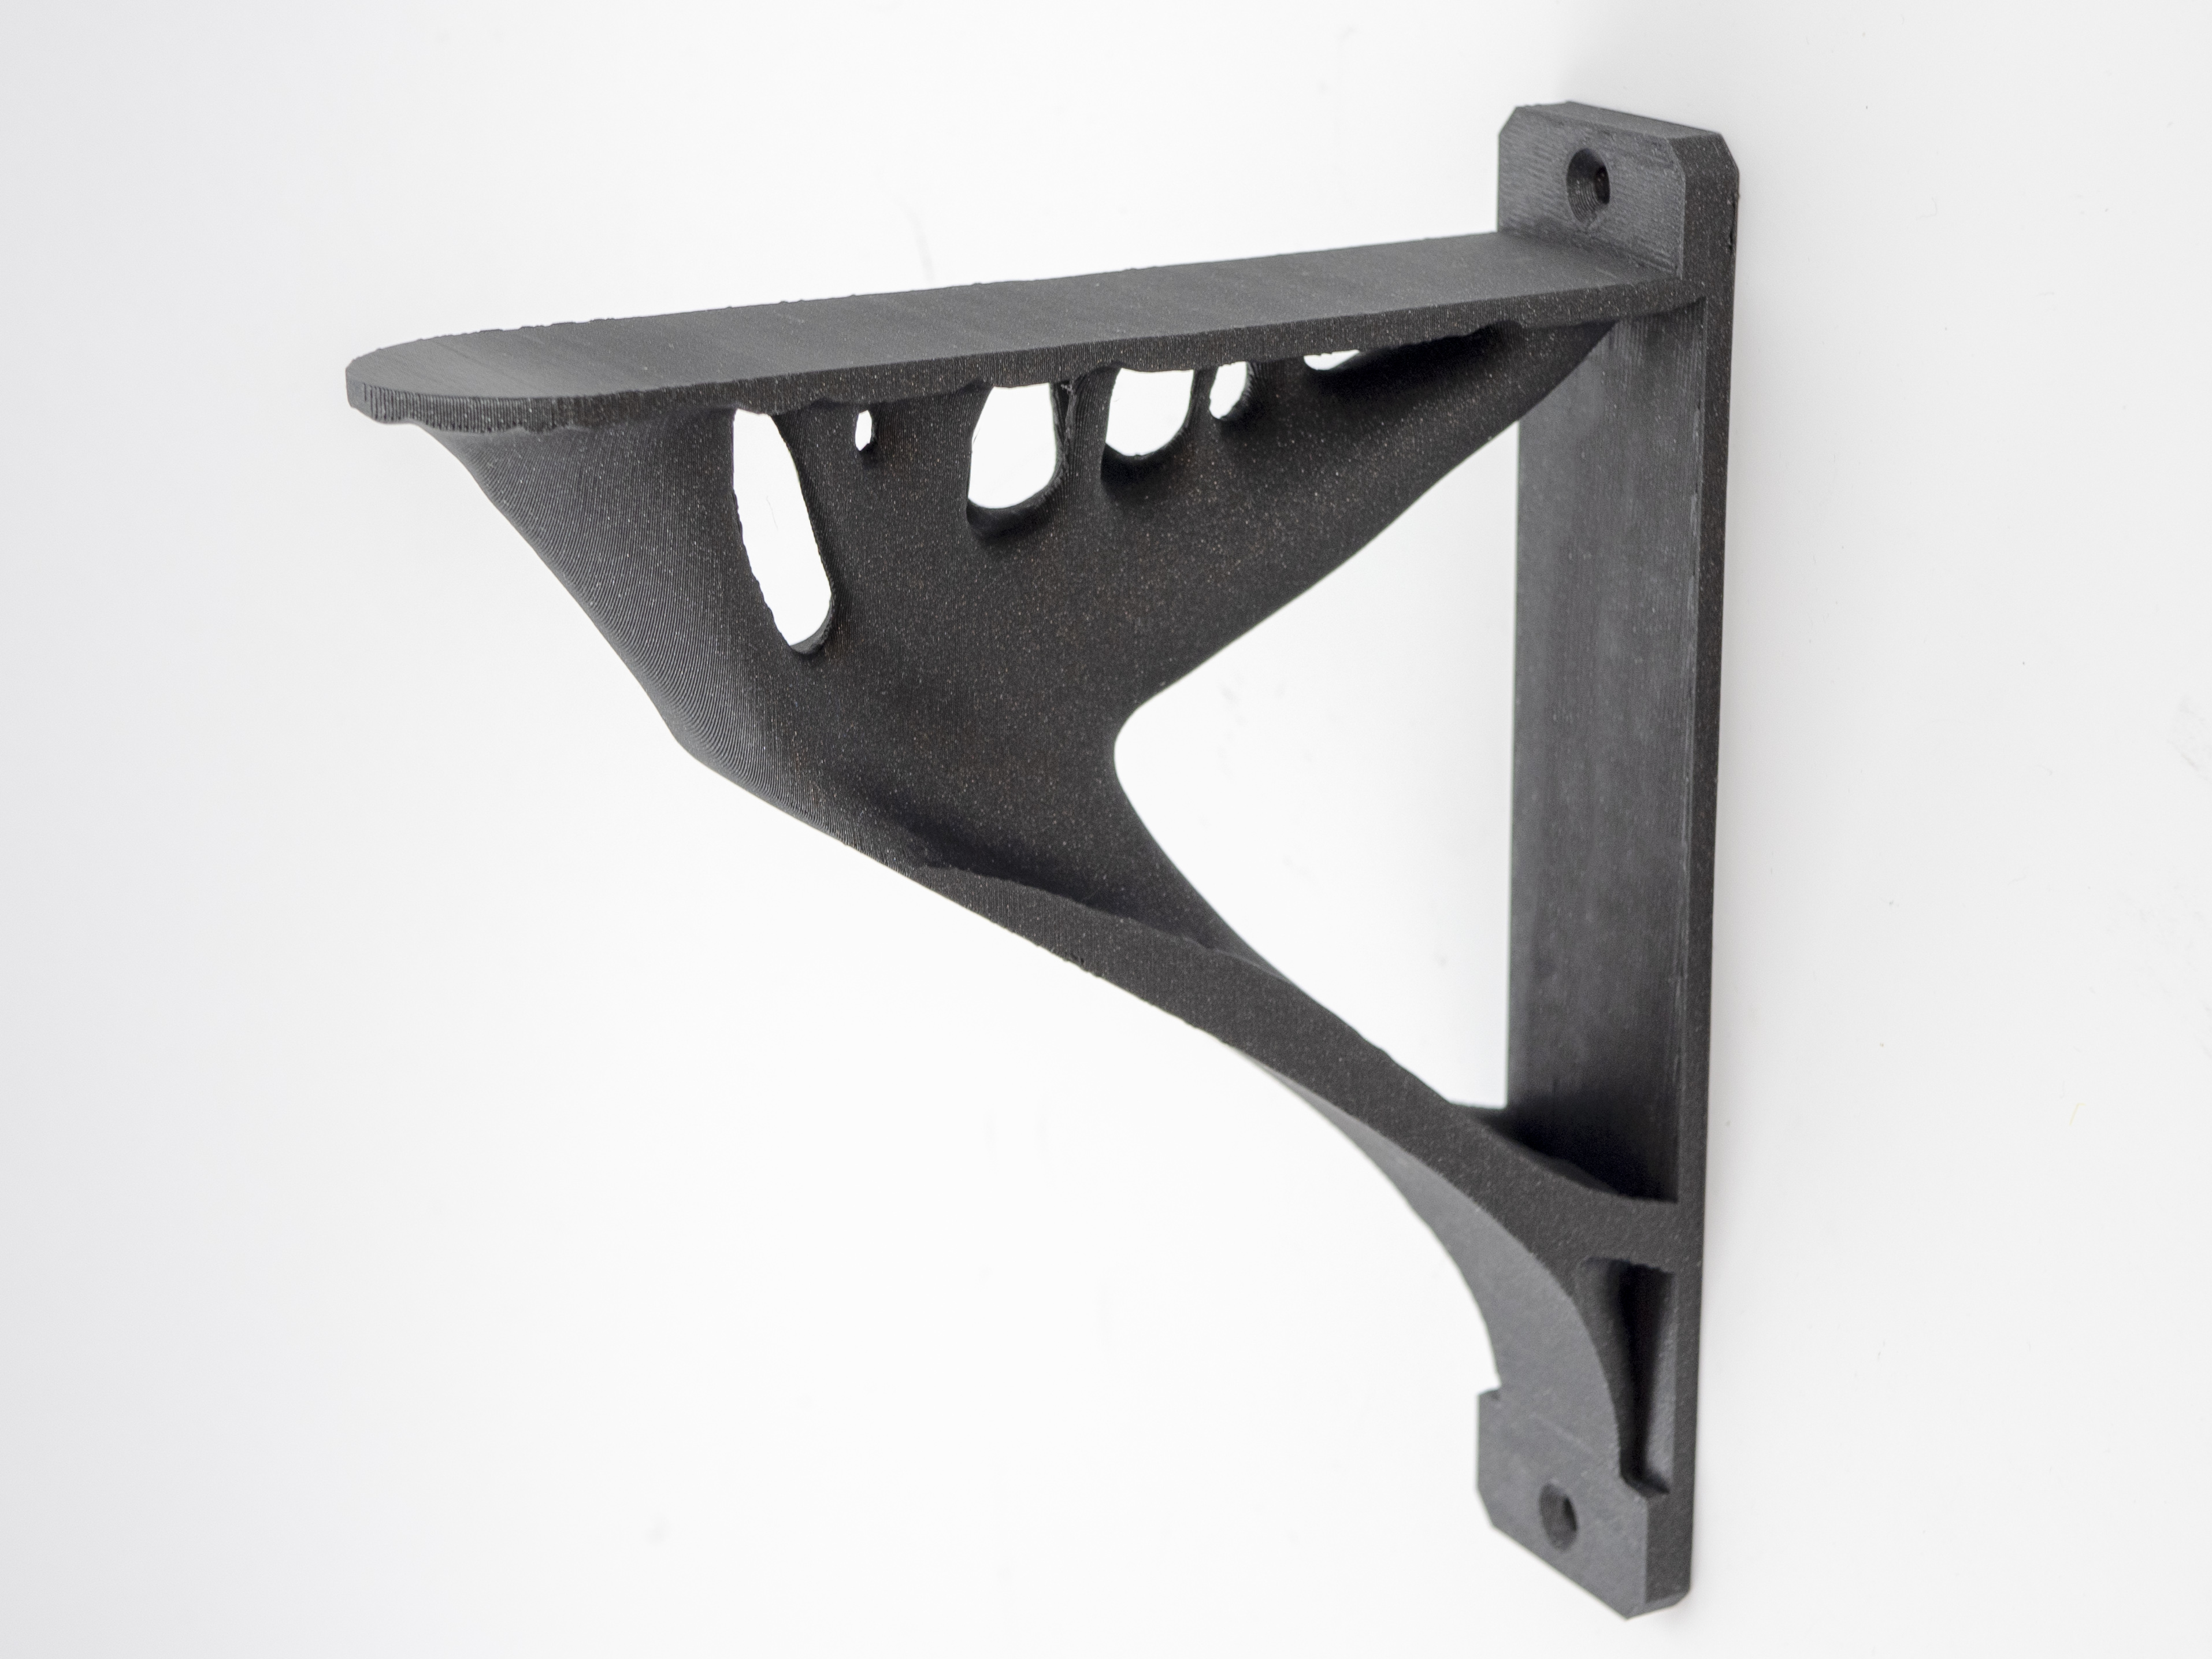 Smoothed topology optimized shelf bracket - Flat & thicker back, smoothed body